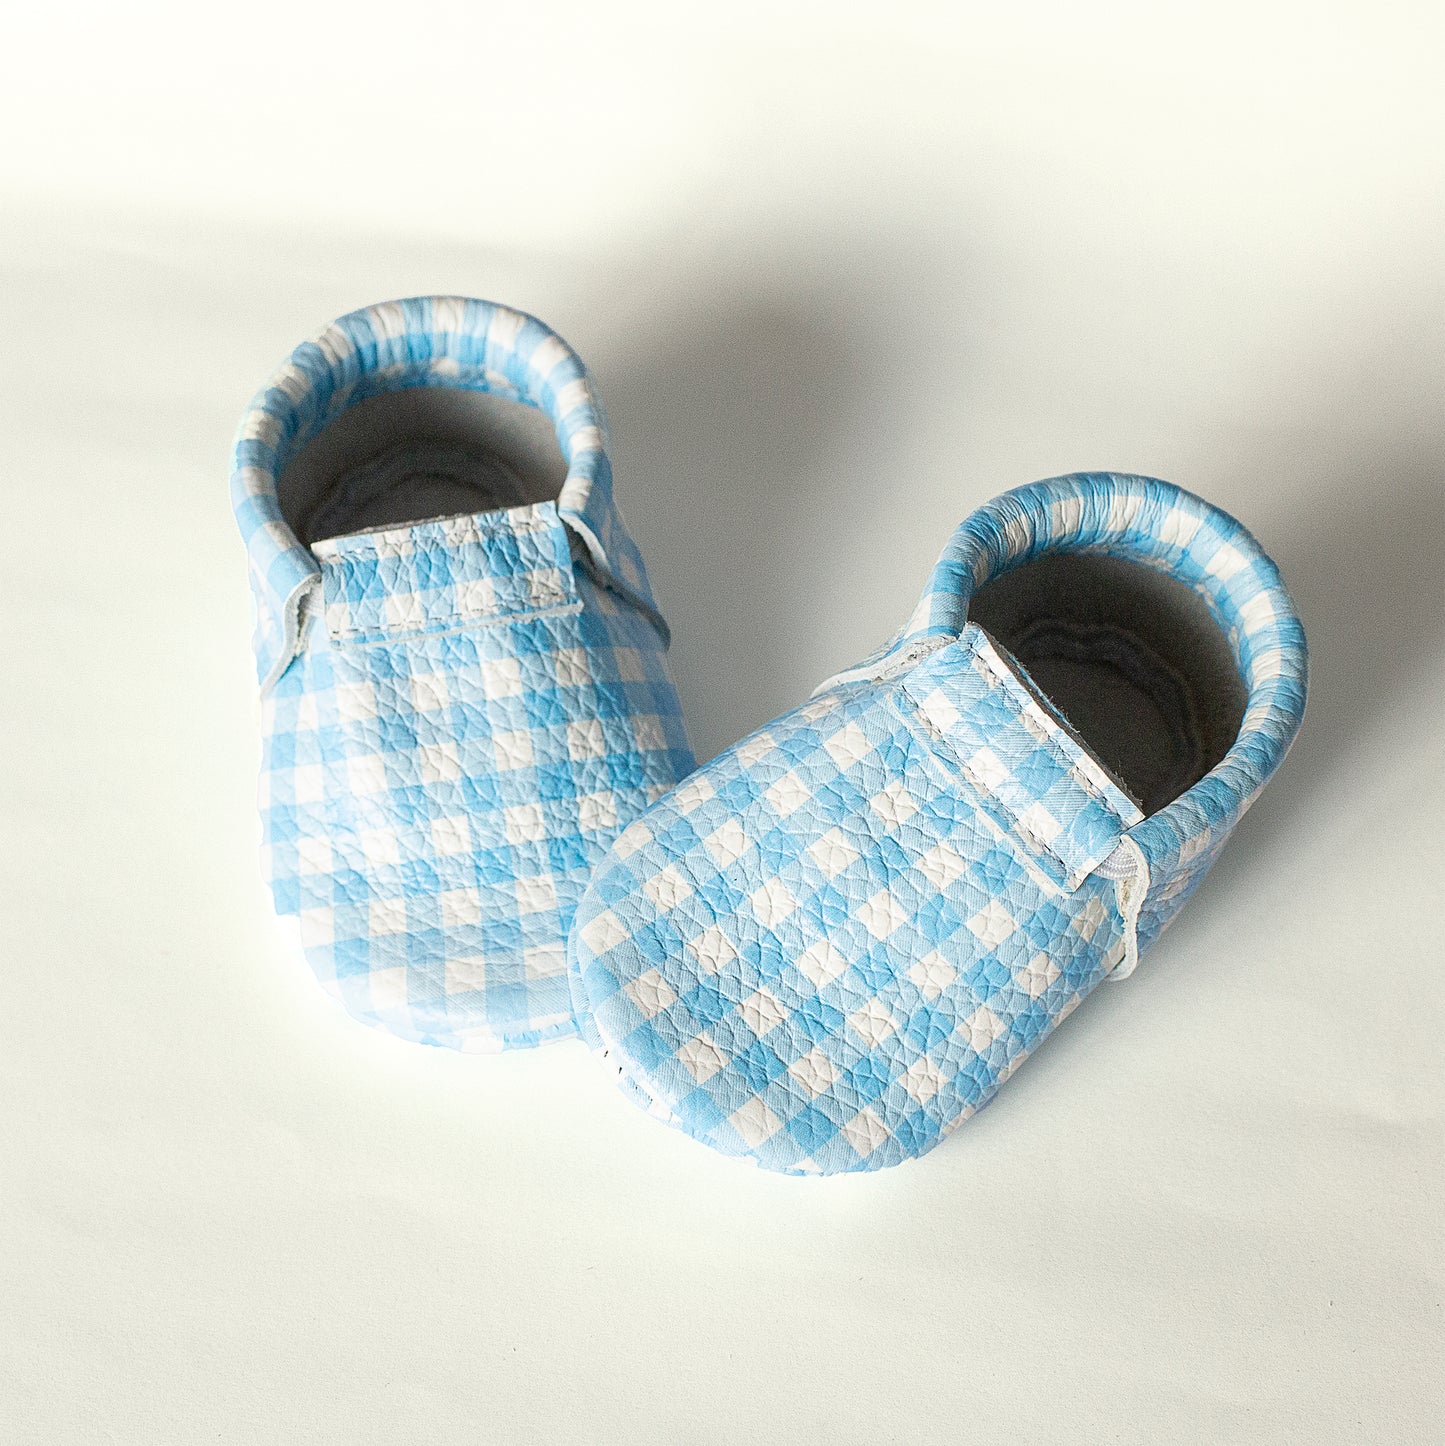 Gingham child shoes, checked pattern, newborn moccasins